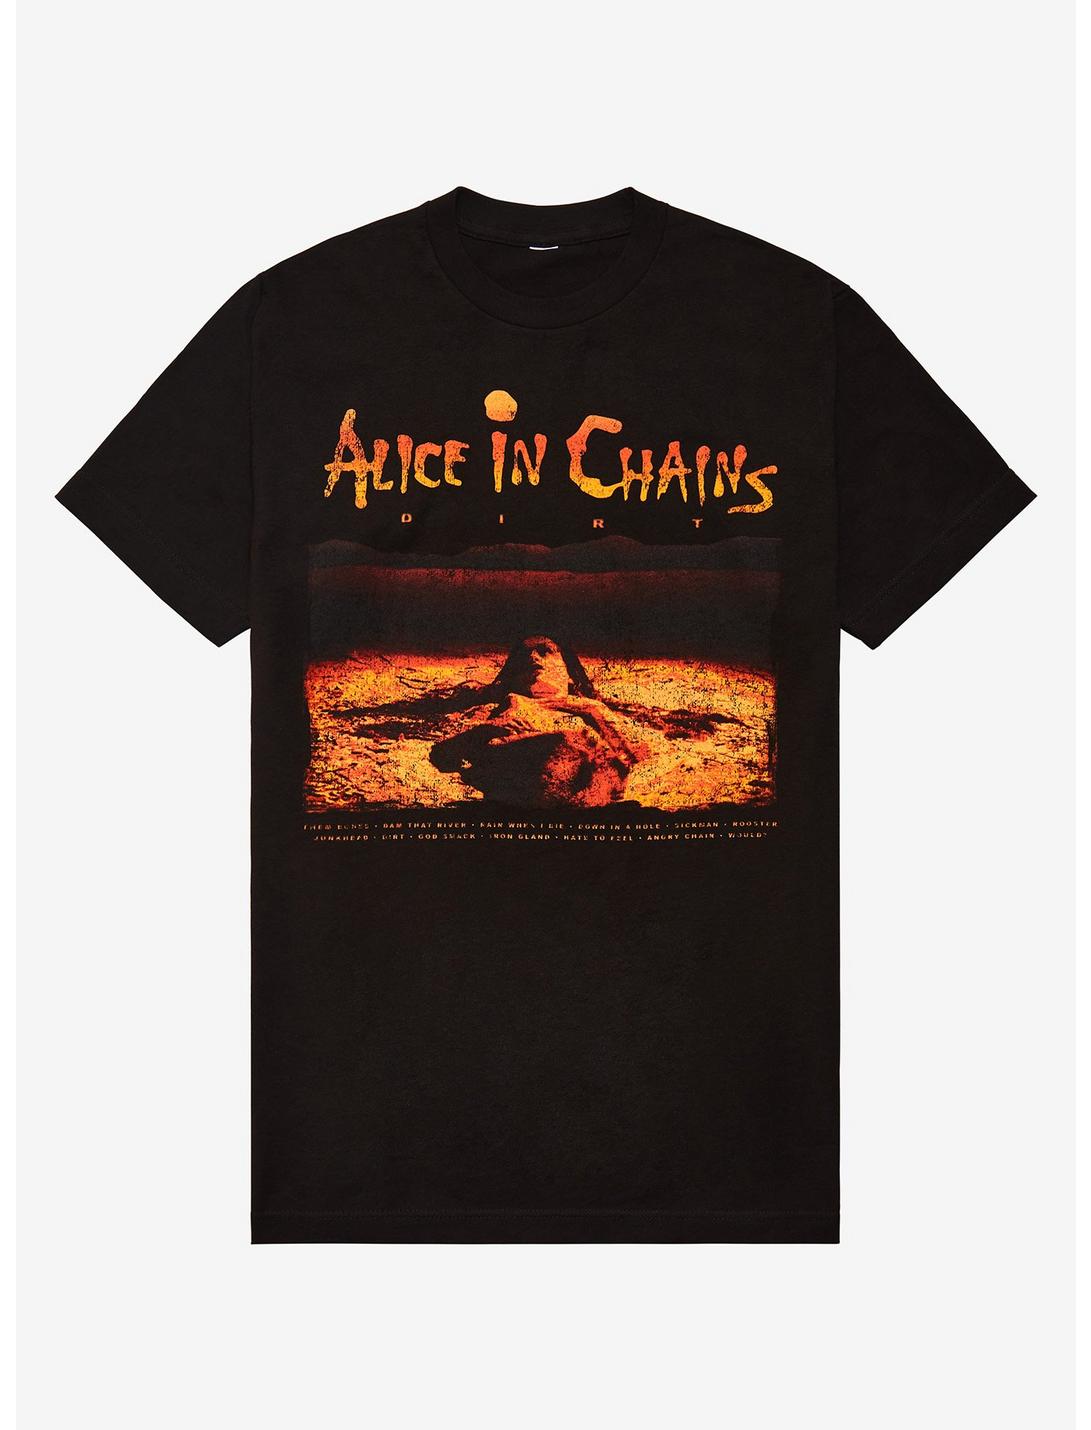 Alice In Chains Dirt Tracklist T-Shirt, BLACK, hi-res